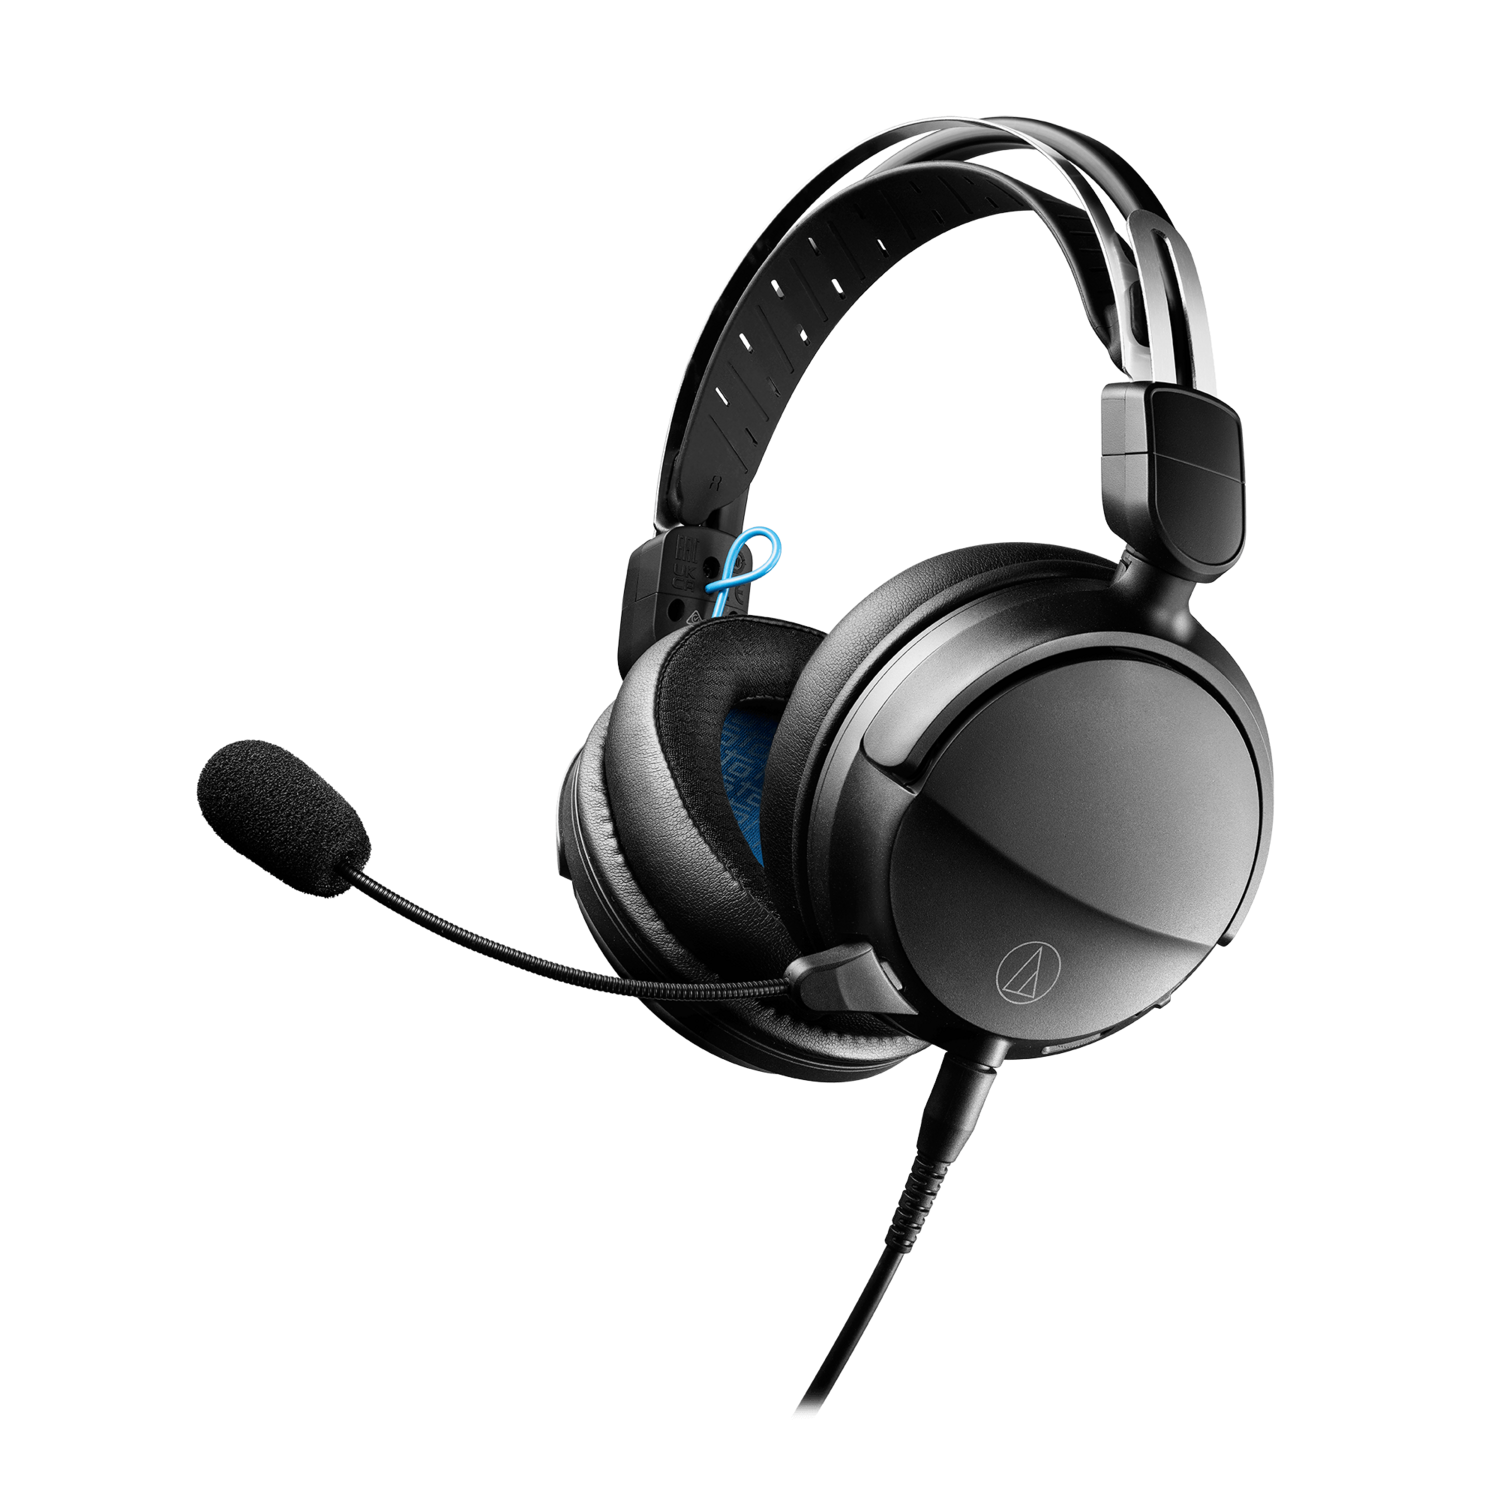 Audio Technica High-Fidelity Closed-Back Gaming Headset
ATH-GL3